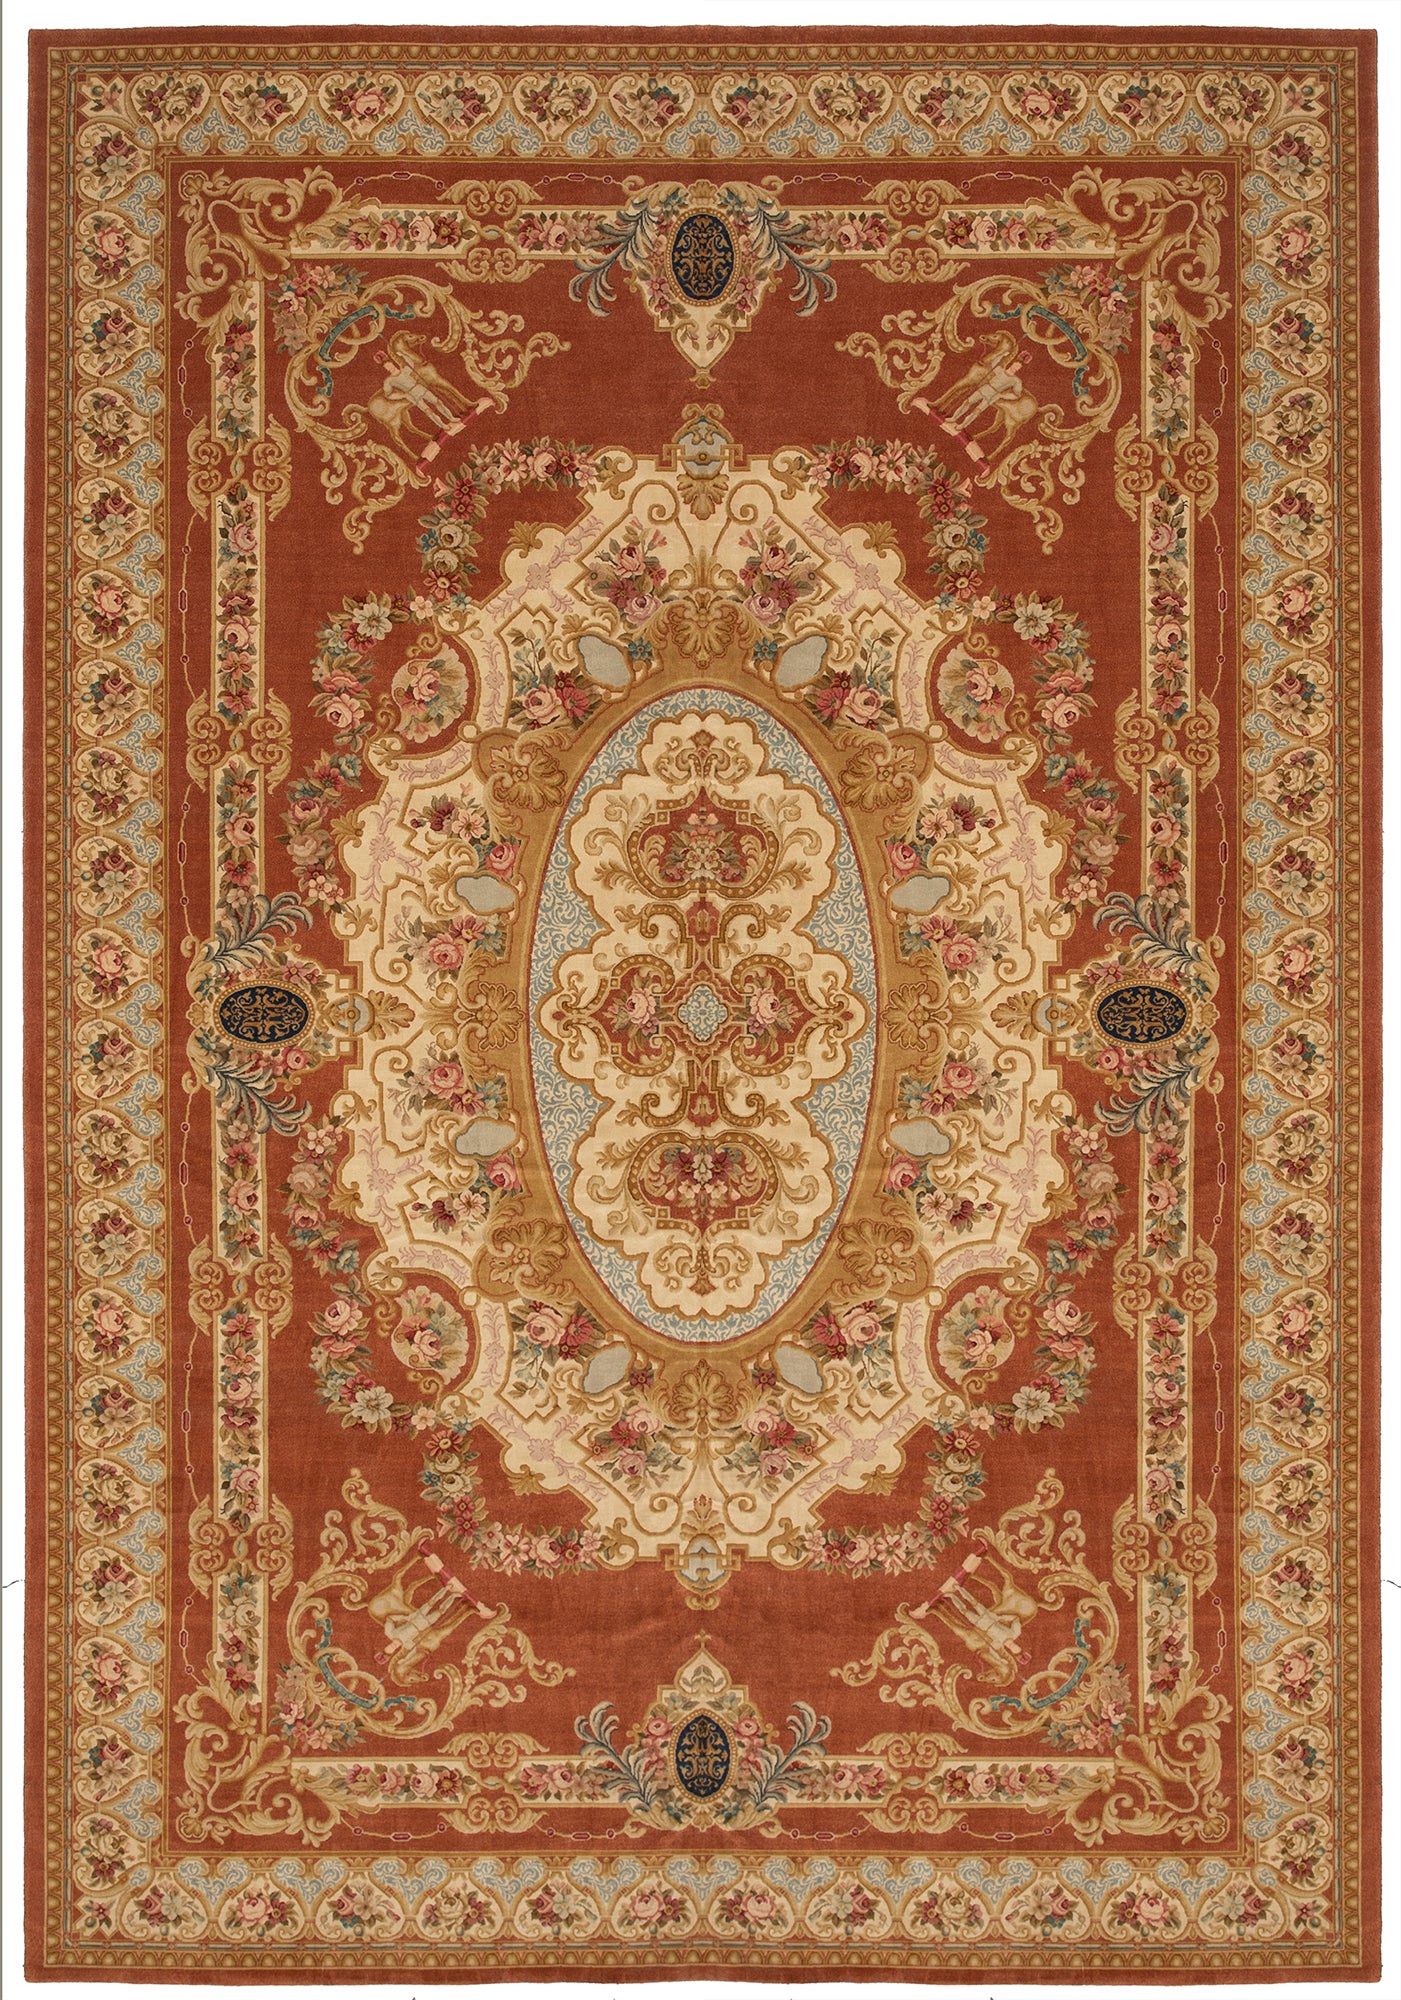 13x19 Rust Blue White Floral French Savonnerie Design Rug